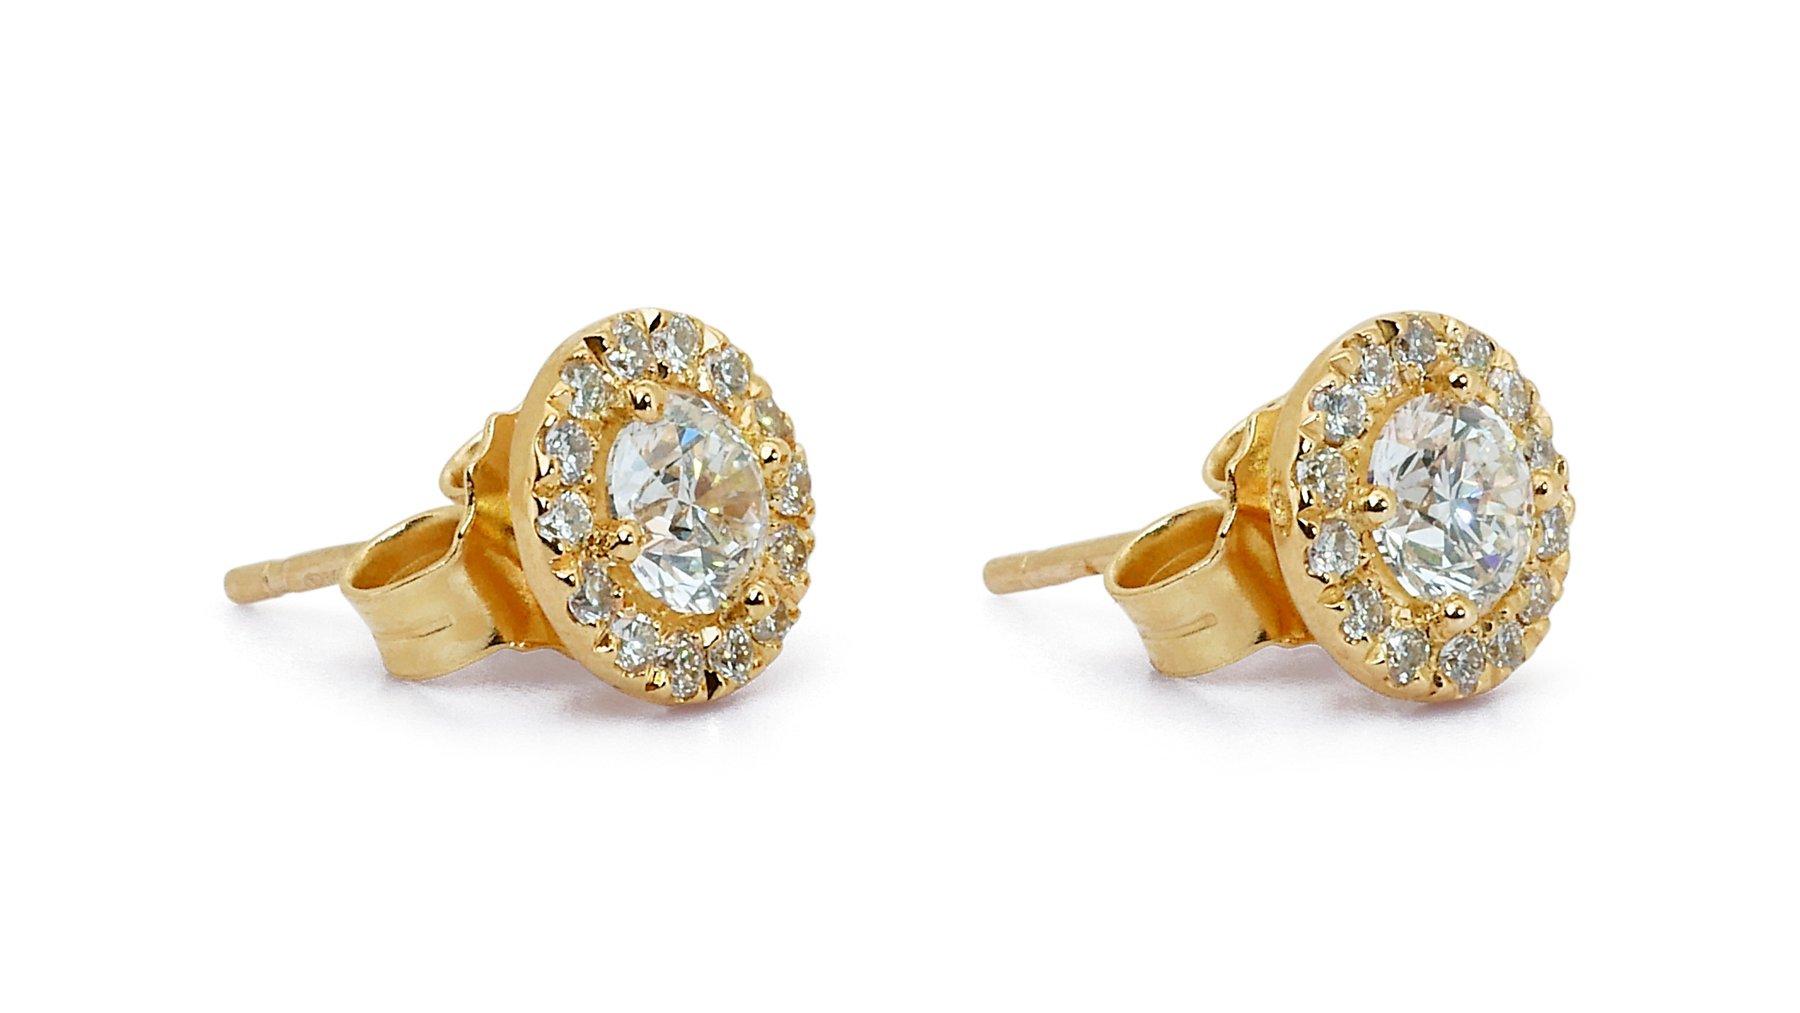 Women's Elegant 18 kt. Yellow Gold Earrings with 1.5 ct Natural Diamond GIA Certificate